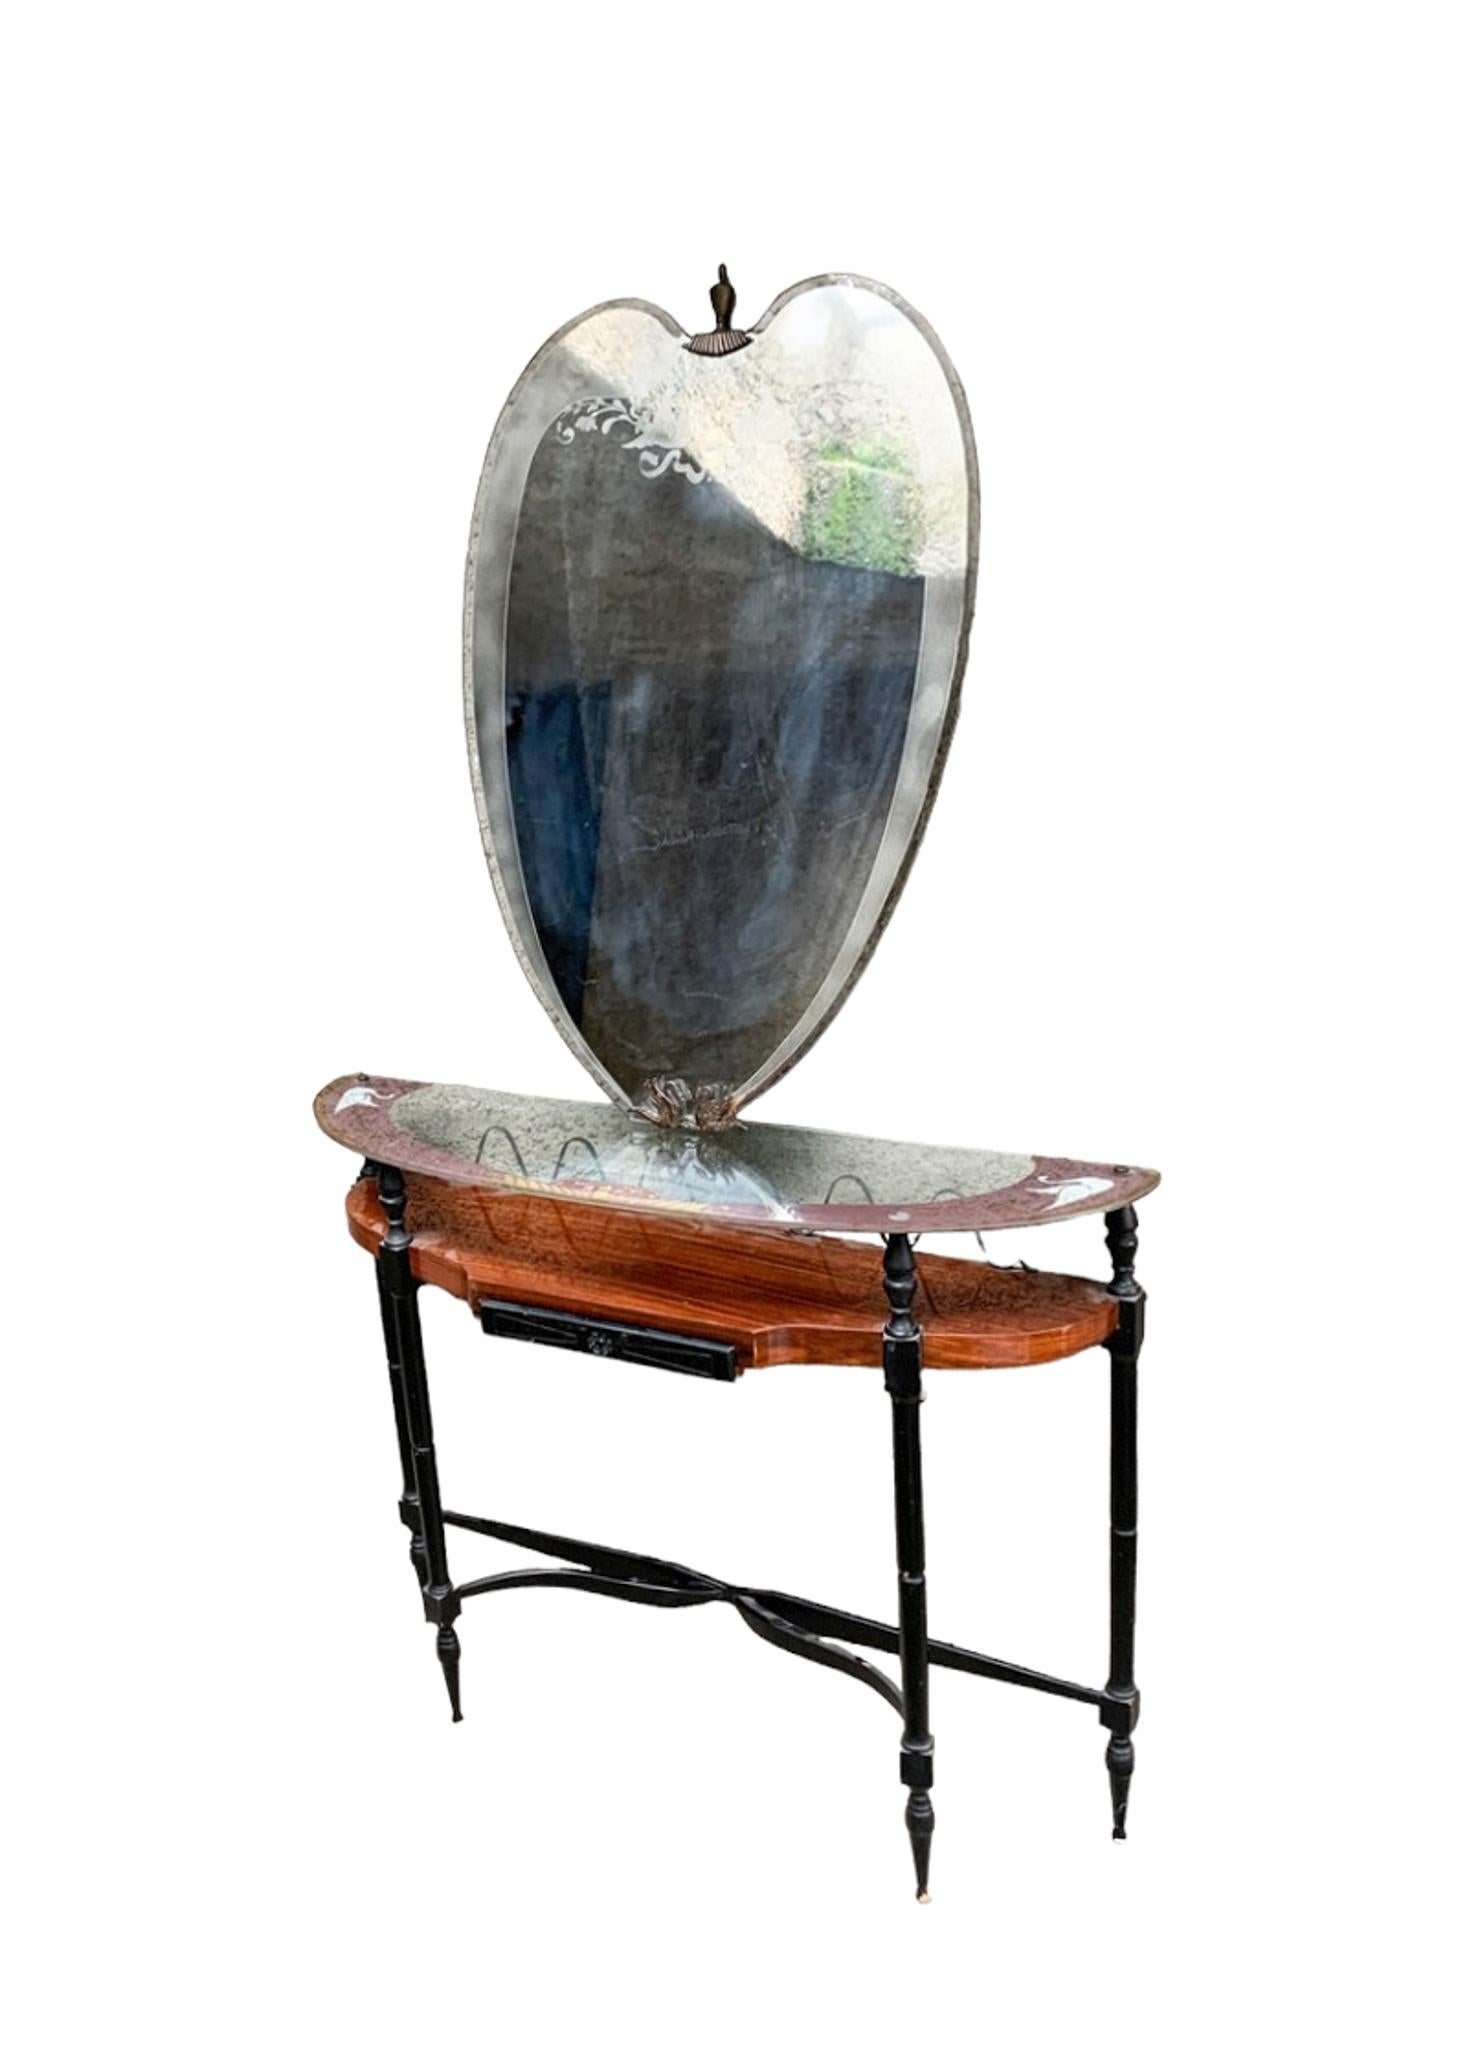 Italian Console with decorated mirror made in the 1950s

here are the dimension of the two pieces: 

Table Console: Ø 102 cm Ø cm 28 h cm 82

Wall Mirror:  Ø cm 87 h cm 107

The Console table is made of wood, iron and the top is made of glass